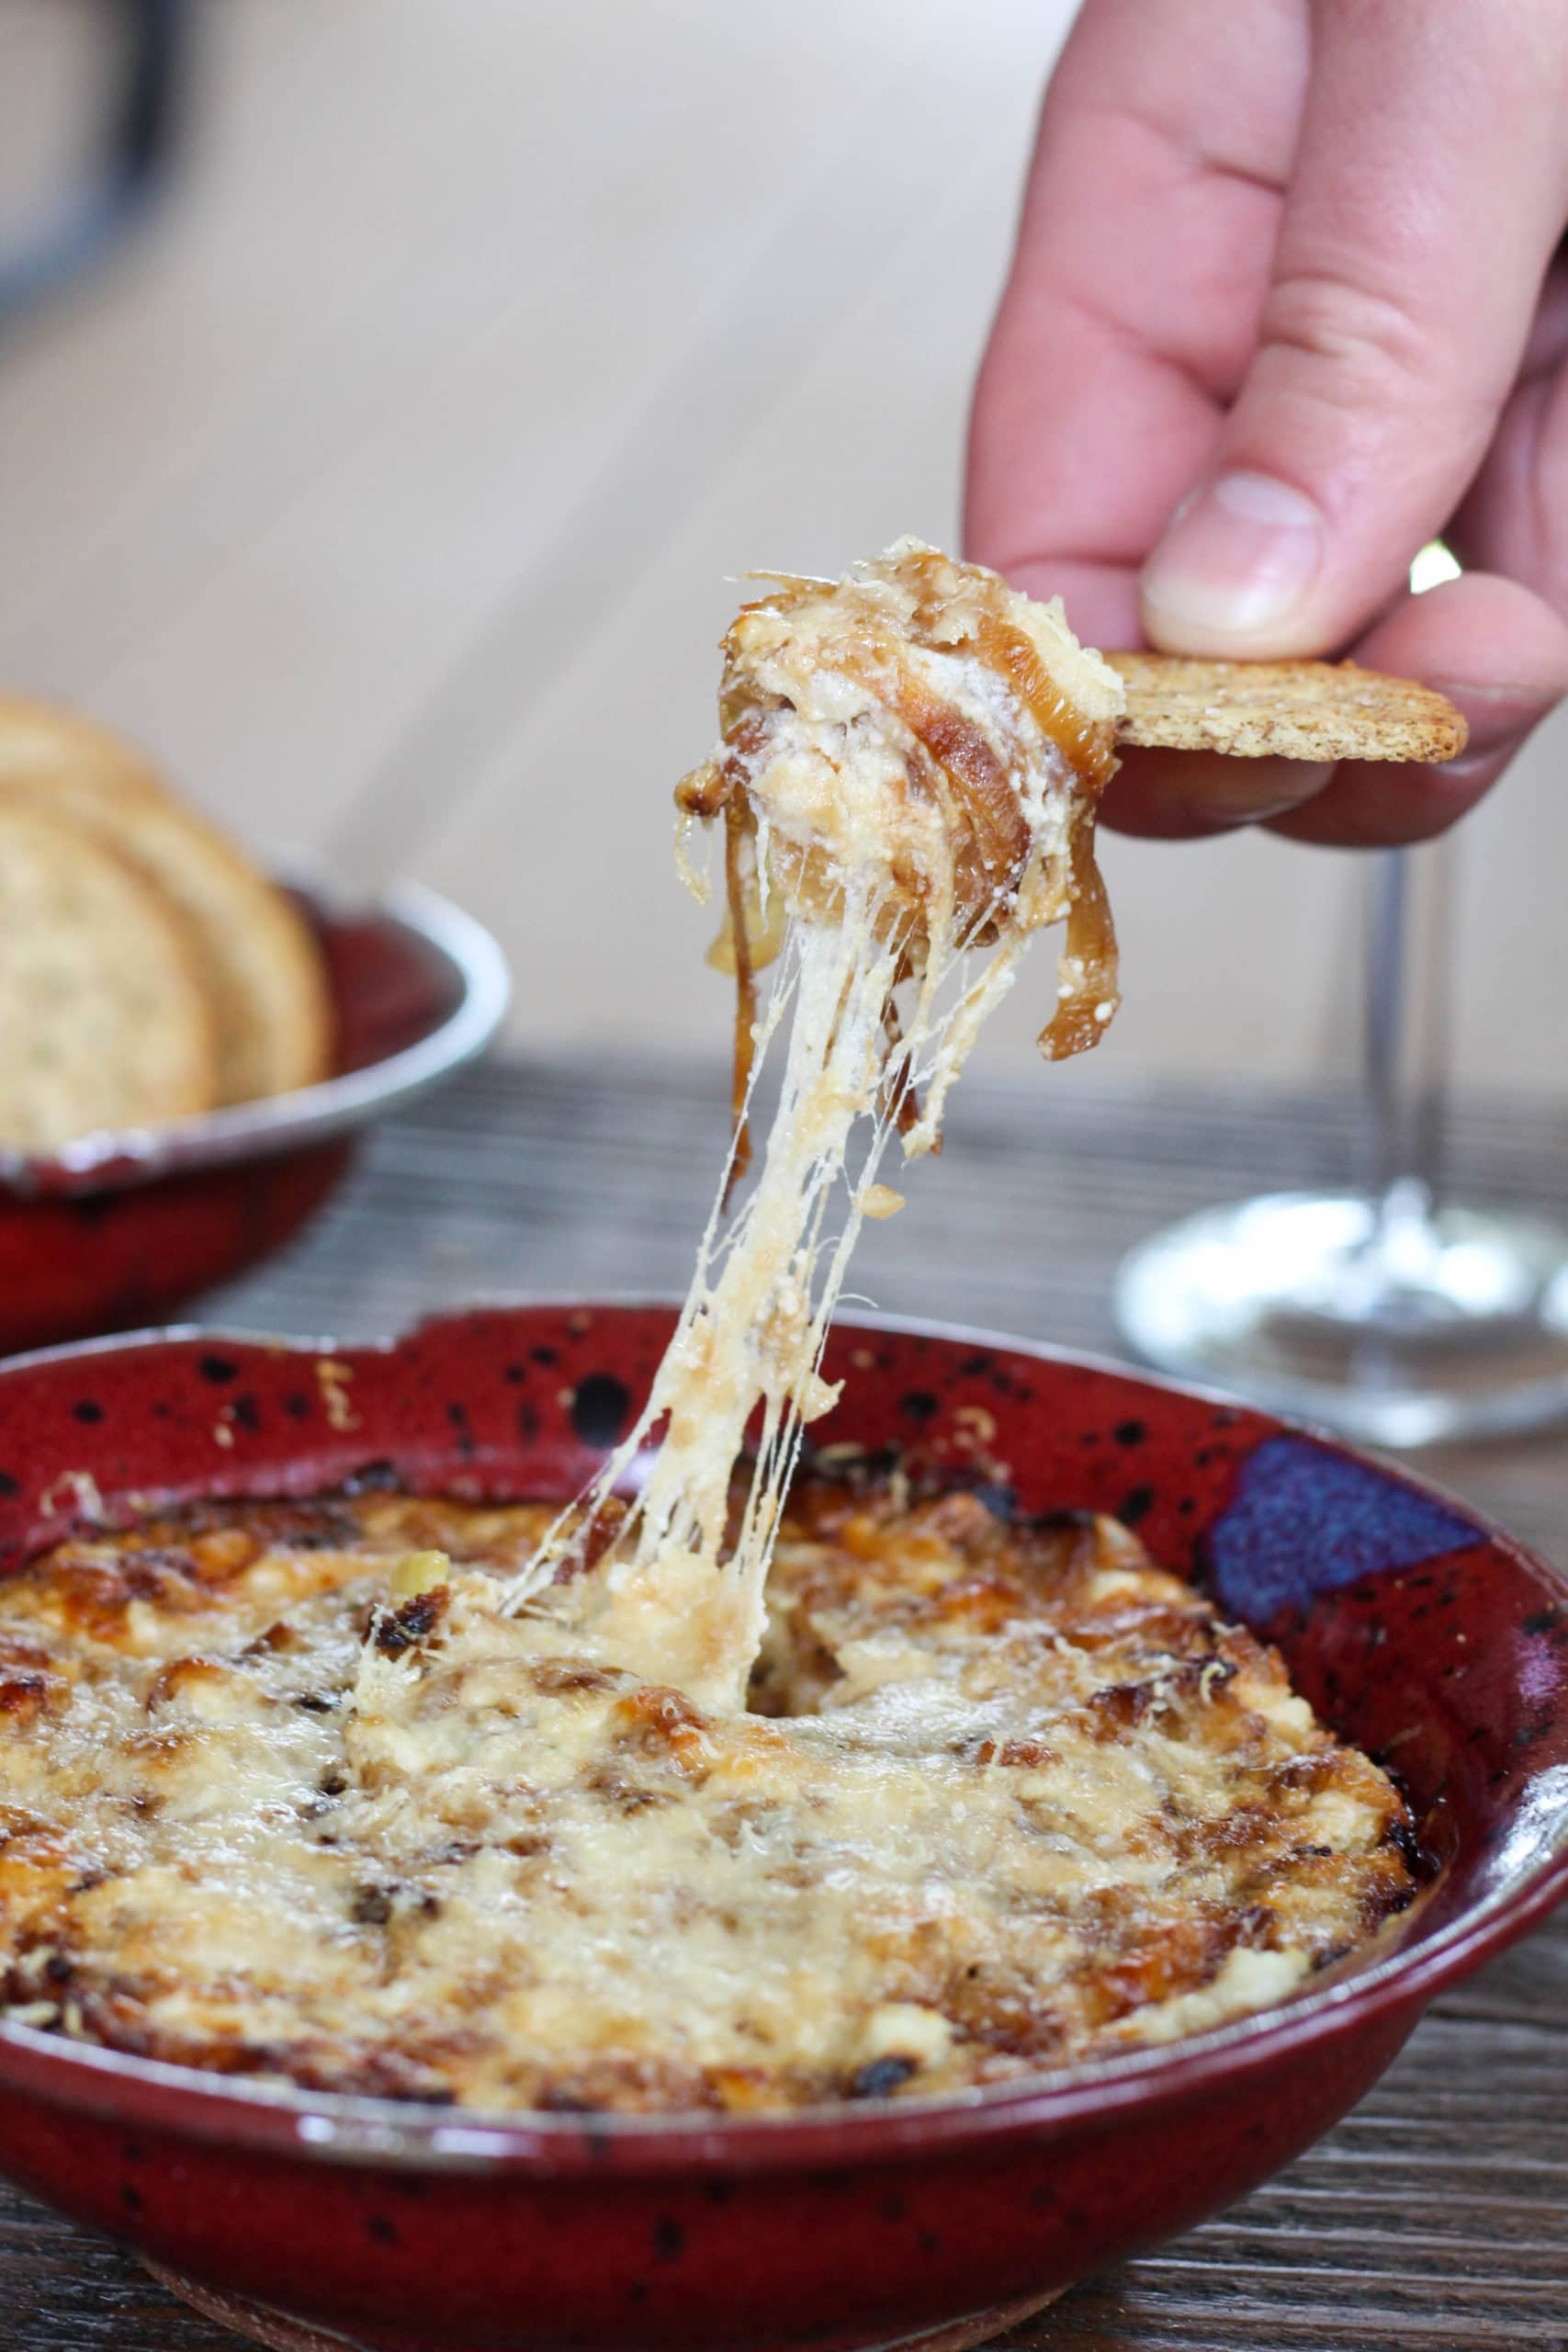 A hand pulling a cracker from a bowl of cheesy caramelized fennel and onion dip